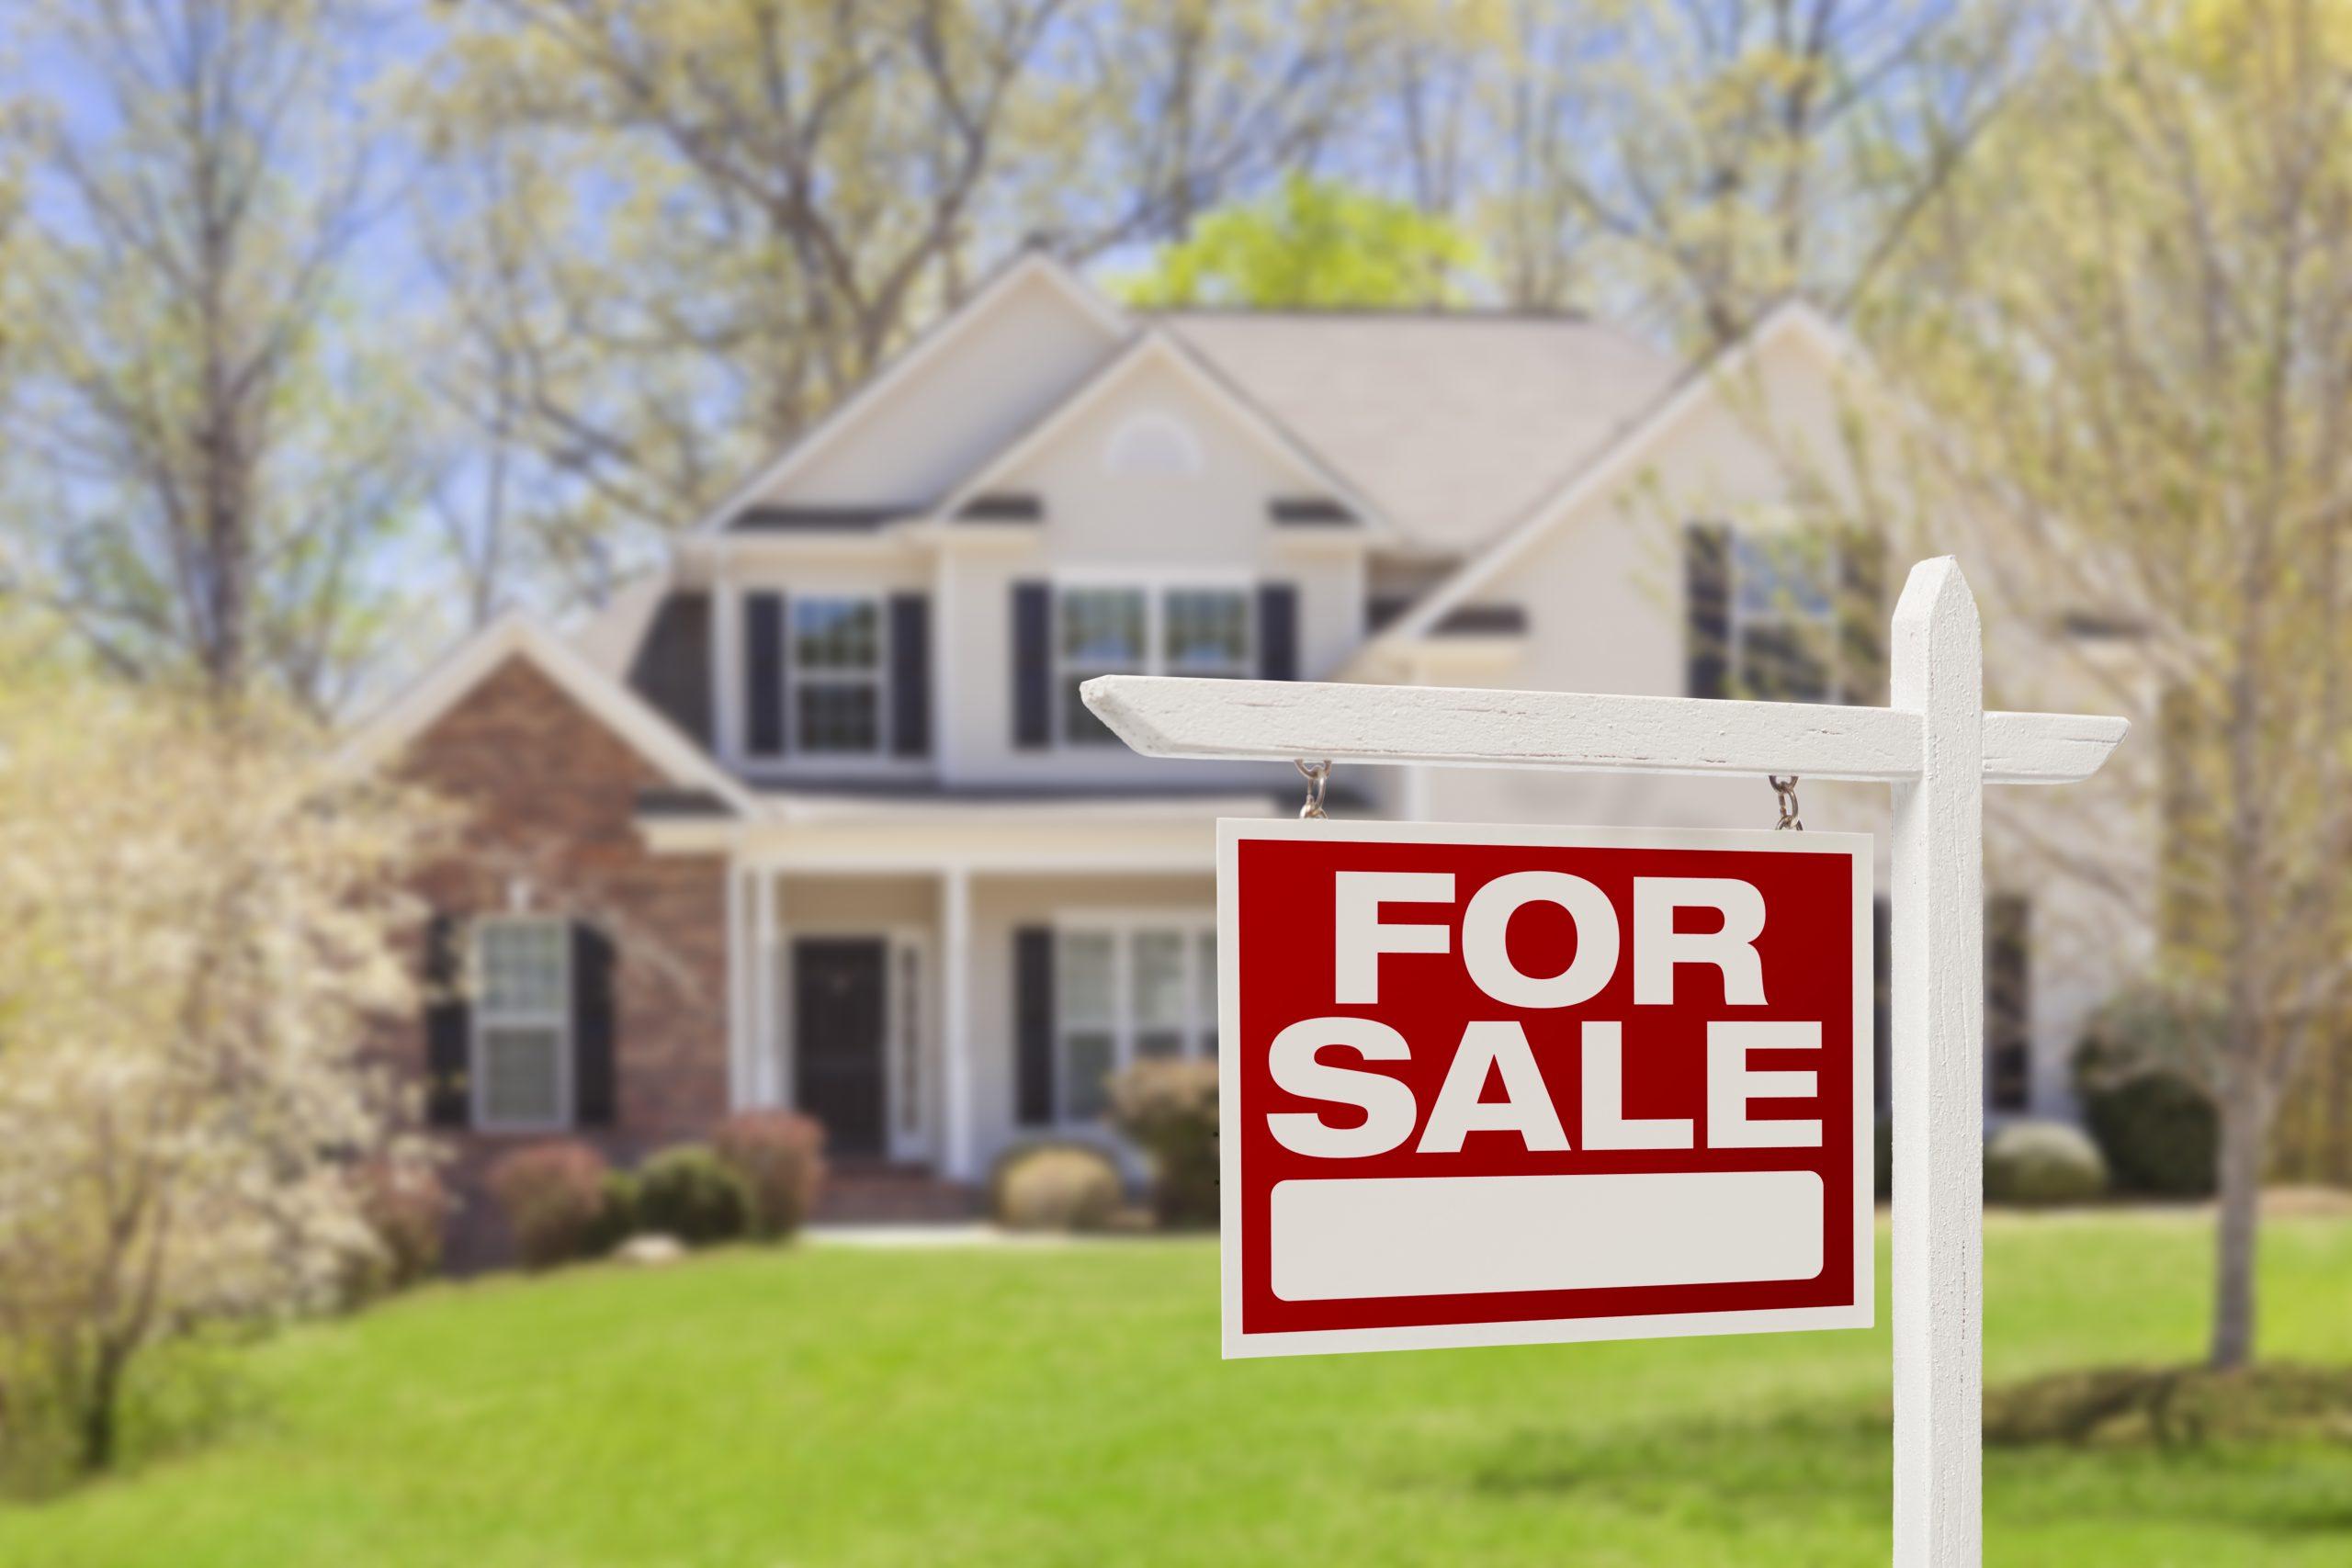 Why use a realtor to sell your home